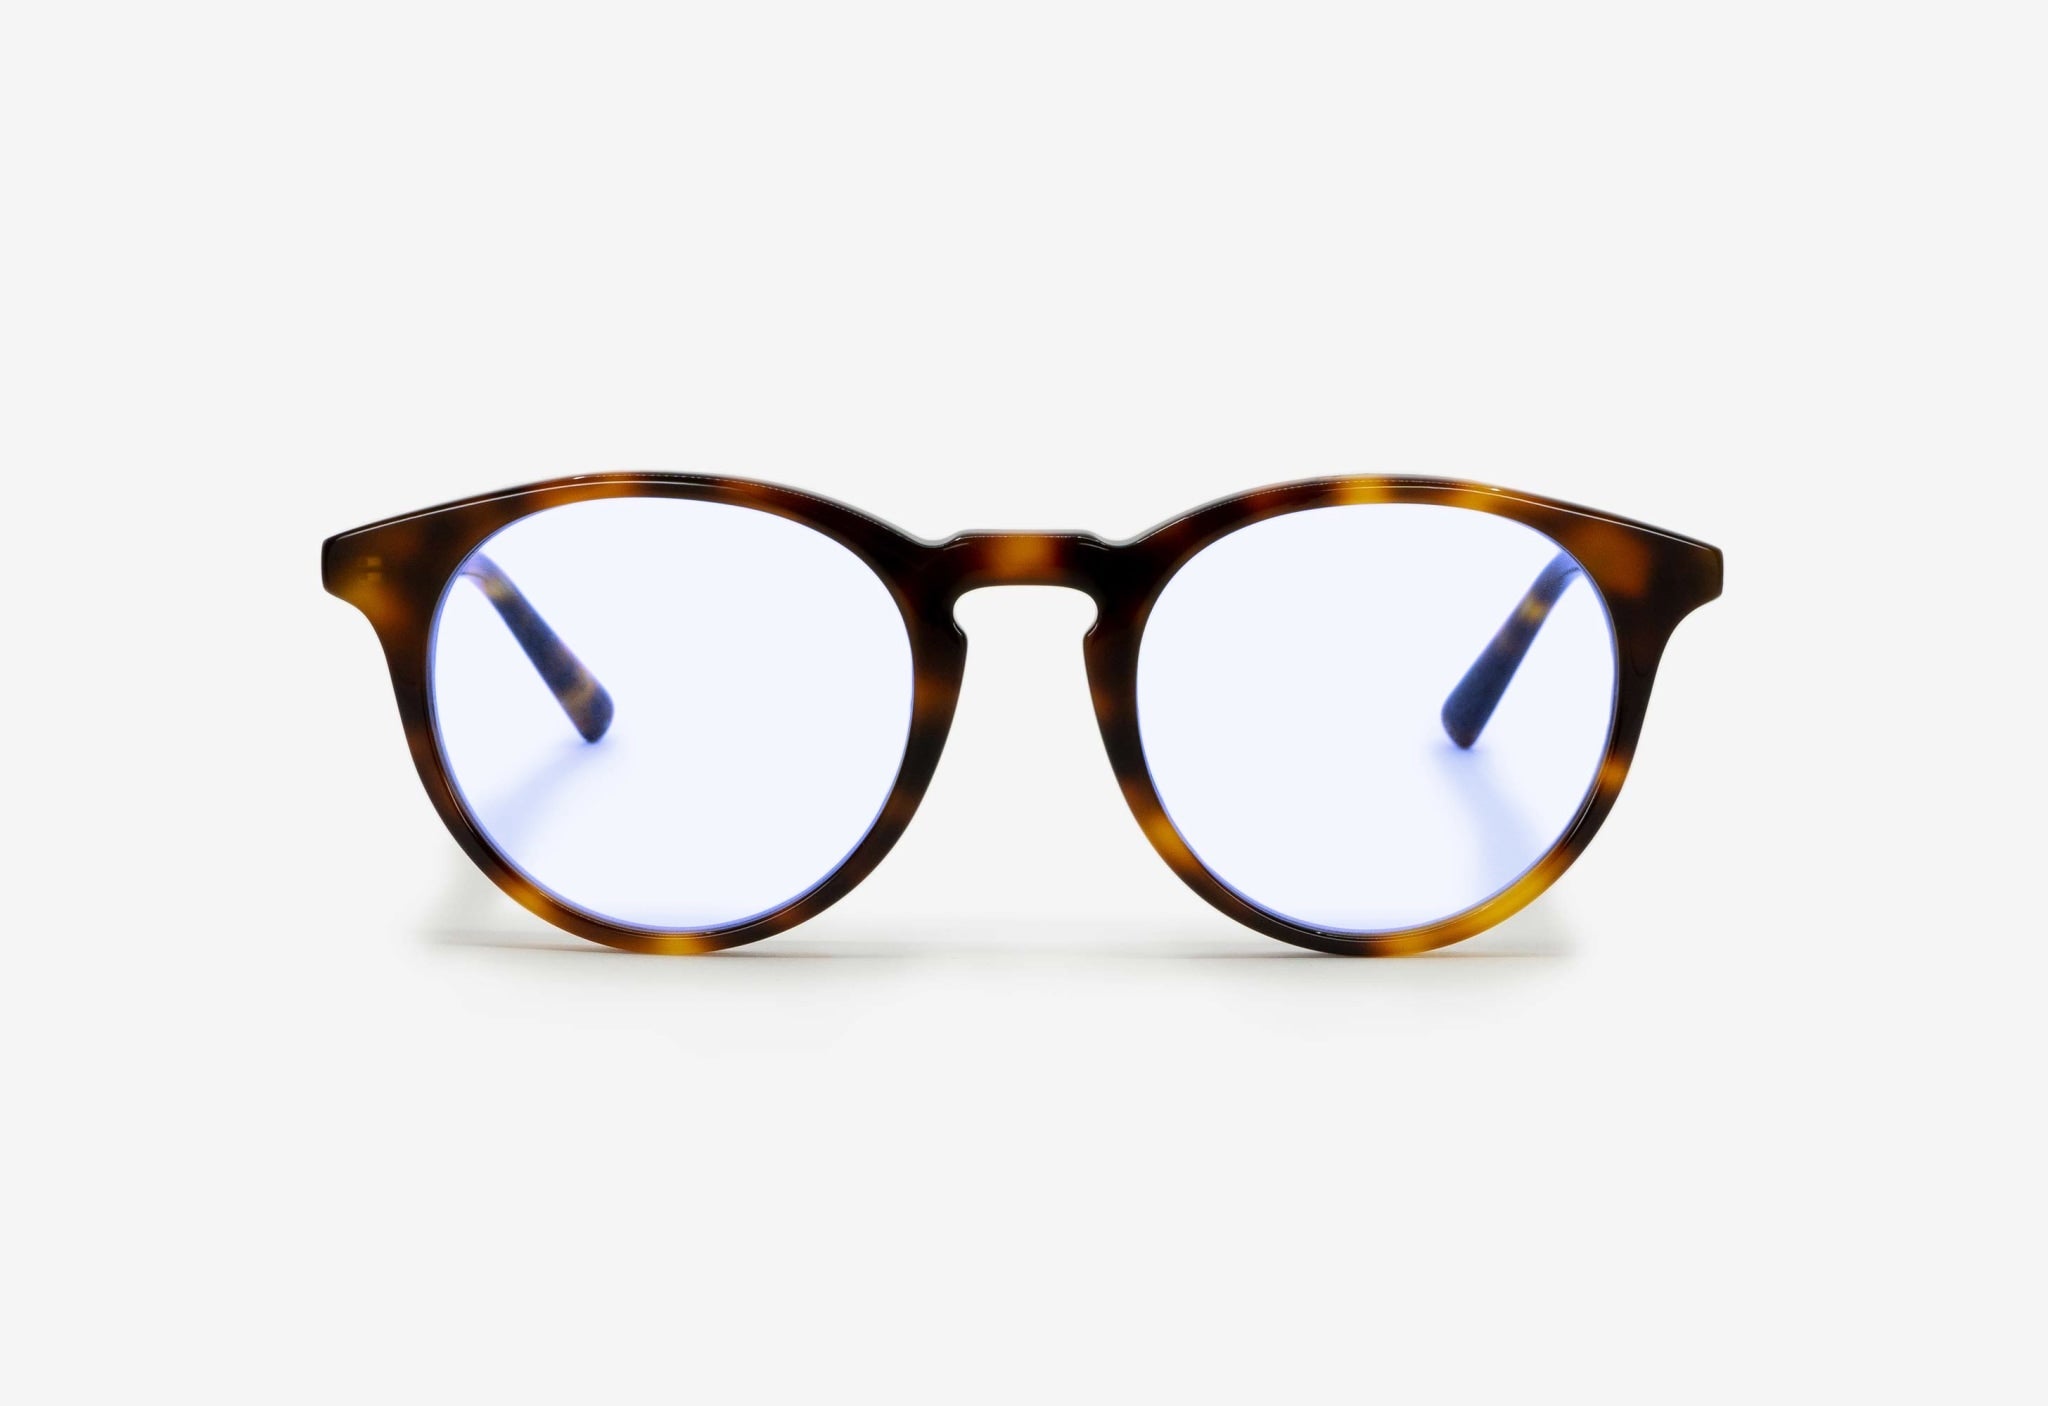 Round blue light glasses with tortoise frame | MessyWeekend